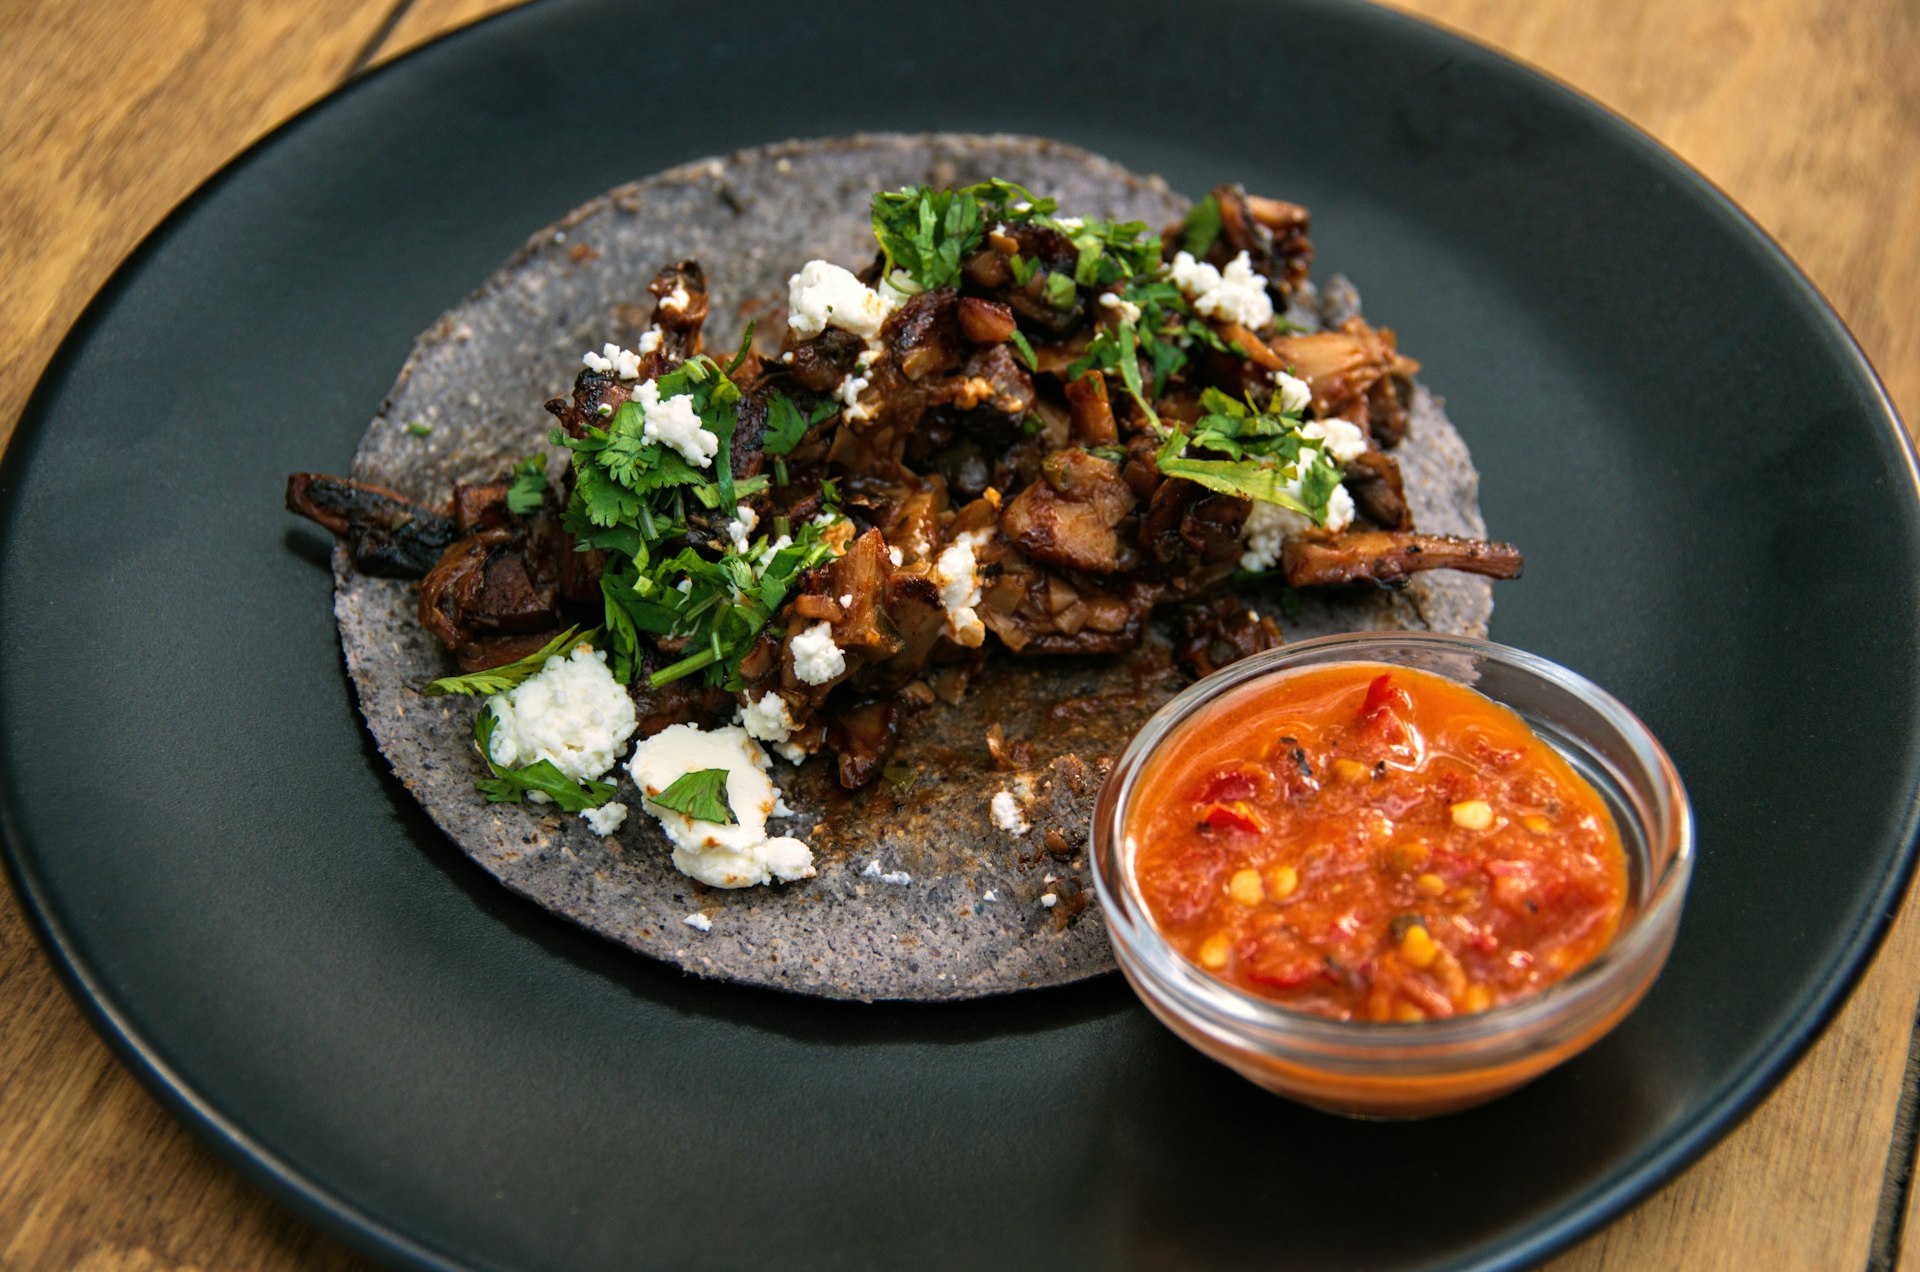 Vegetarian tacos with goats cheese and mushrooms